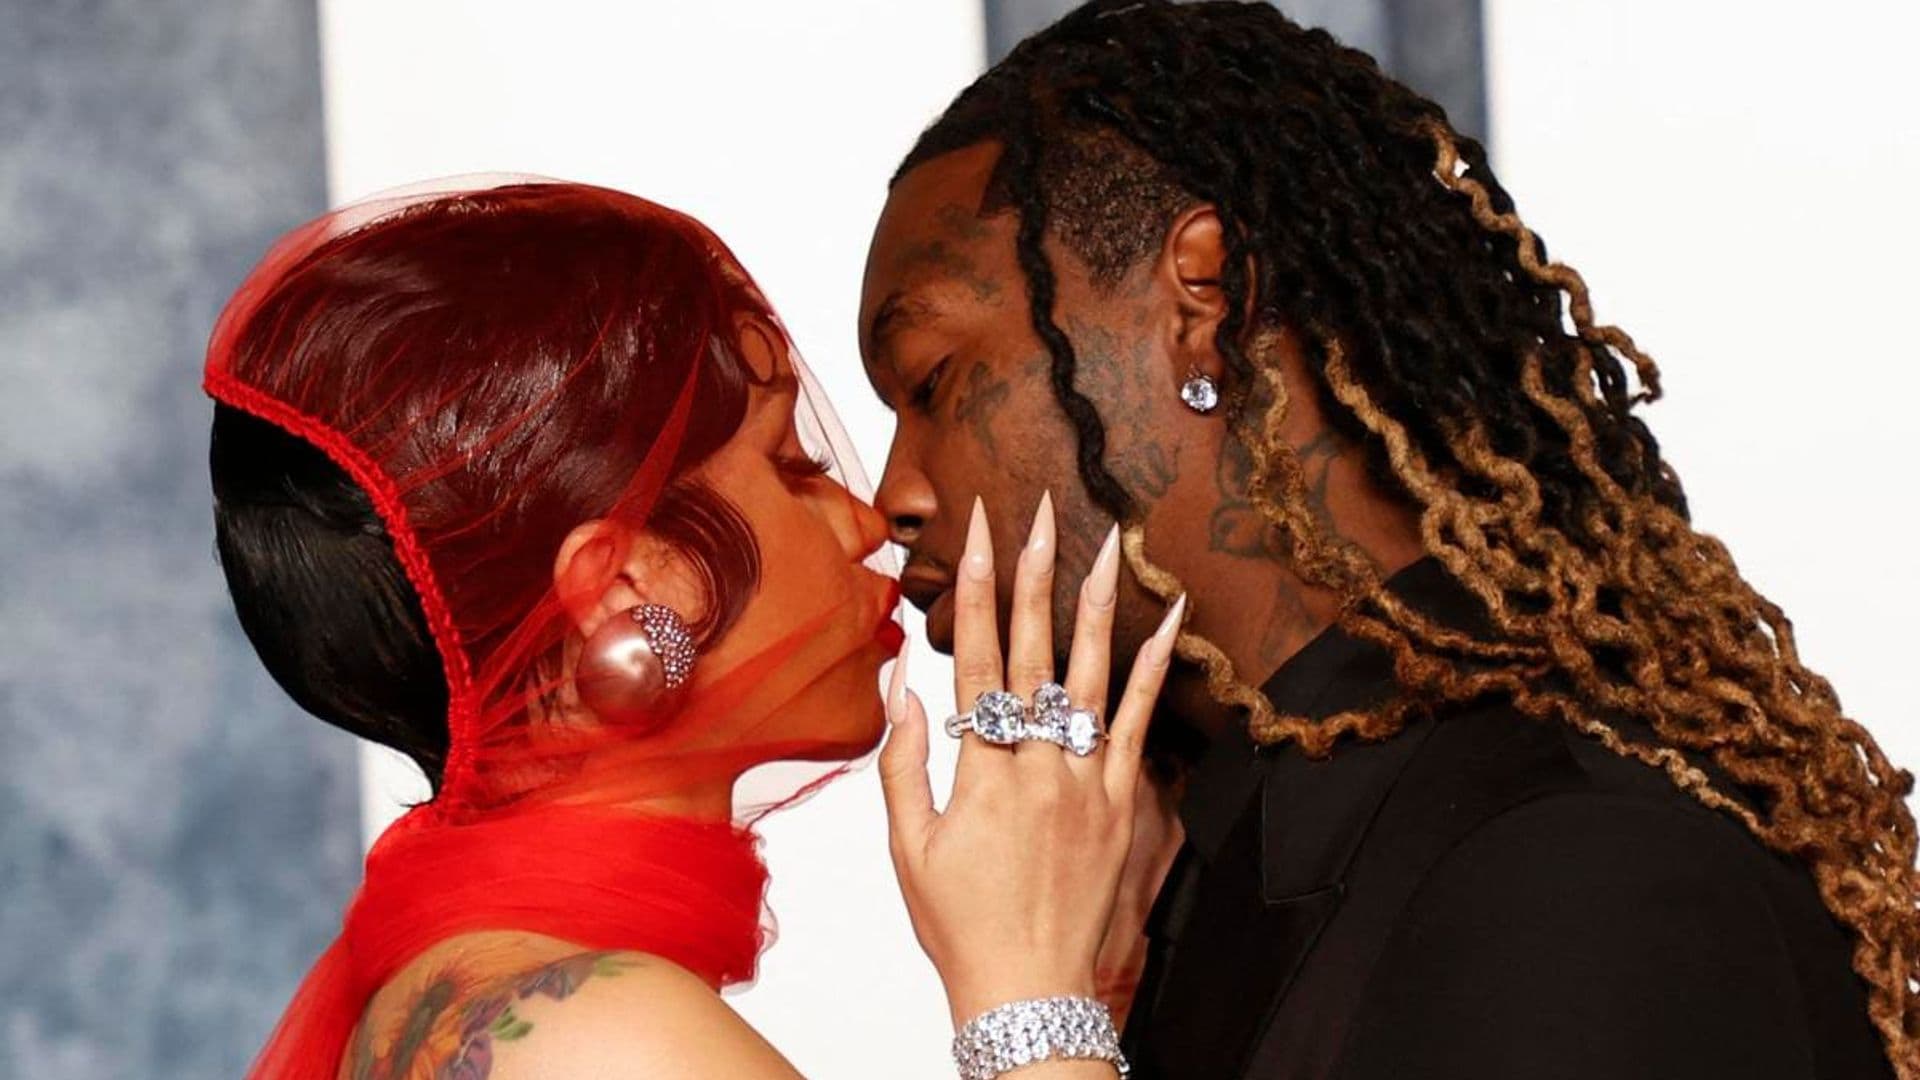 Cardi B and Offset go on a glamorous Parisian appearance amid cheating allegations